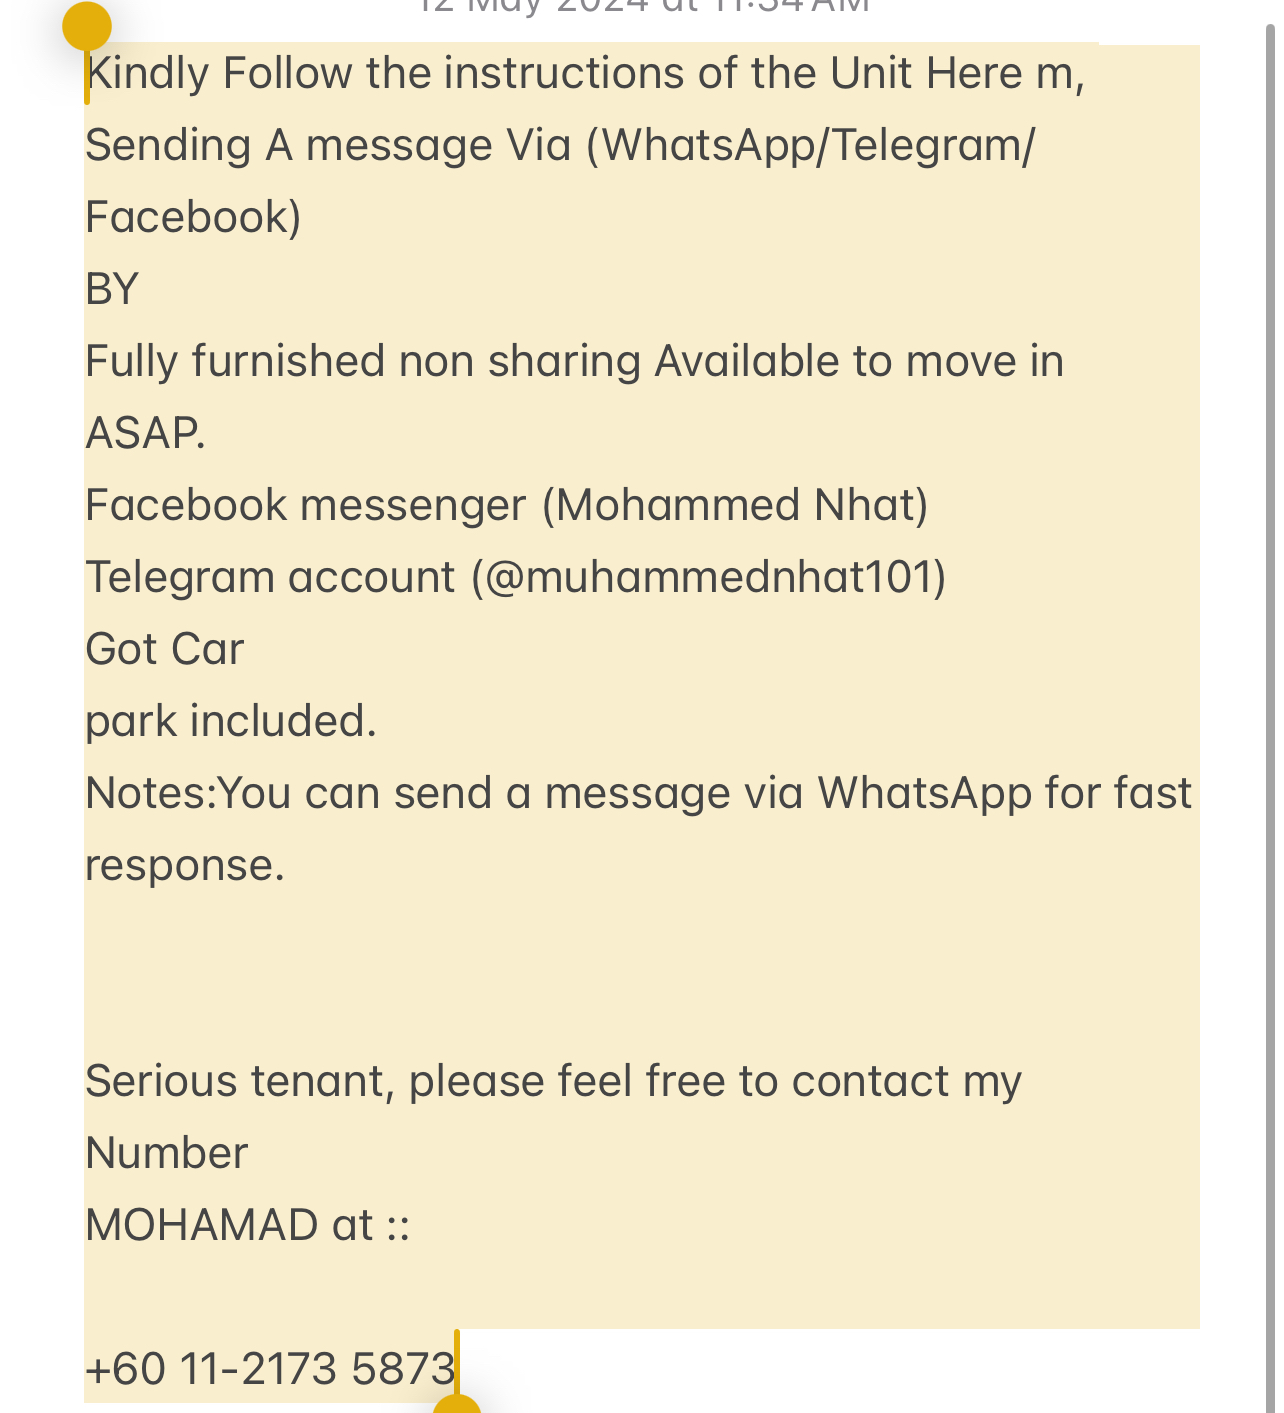 room for rent, full unit, damansara perdana, Send the owner a message on WhatsApp/facebook if you want to RENT the unit facebook (Mohammed Nhat)&Telegram(@muhammednhat101) Fully furnished non sharing :(comfortable)